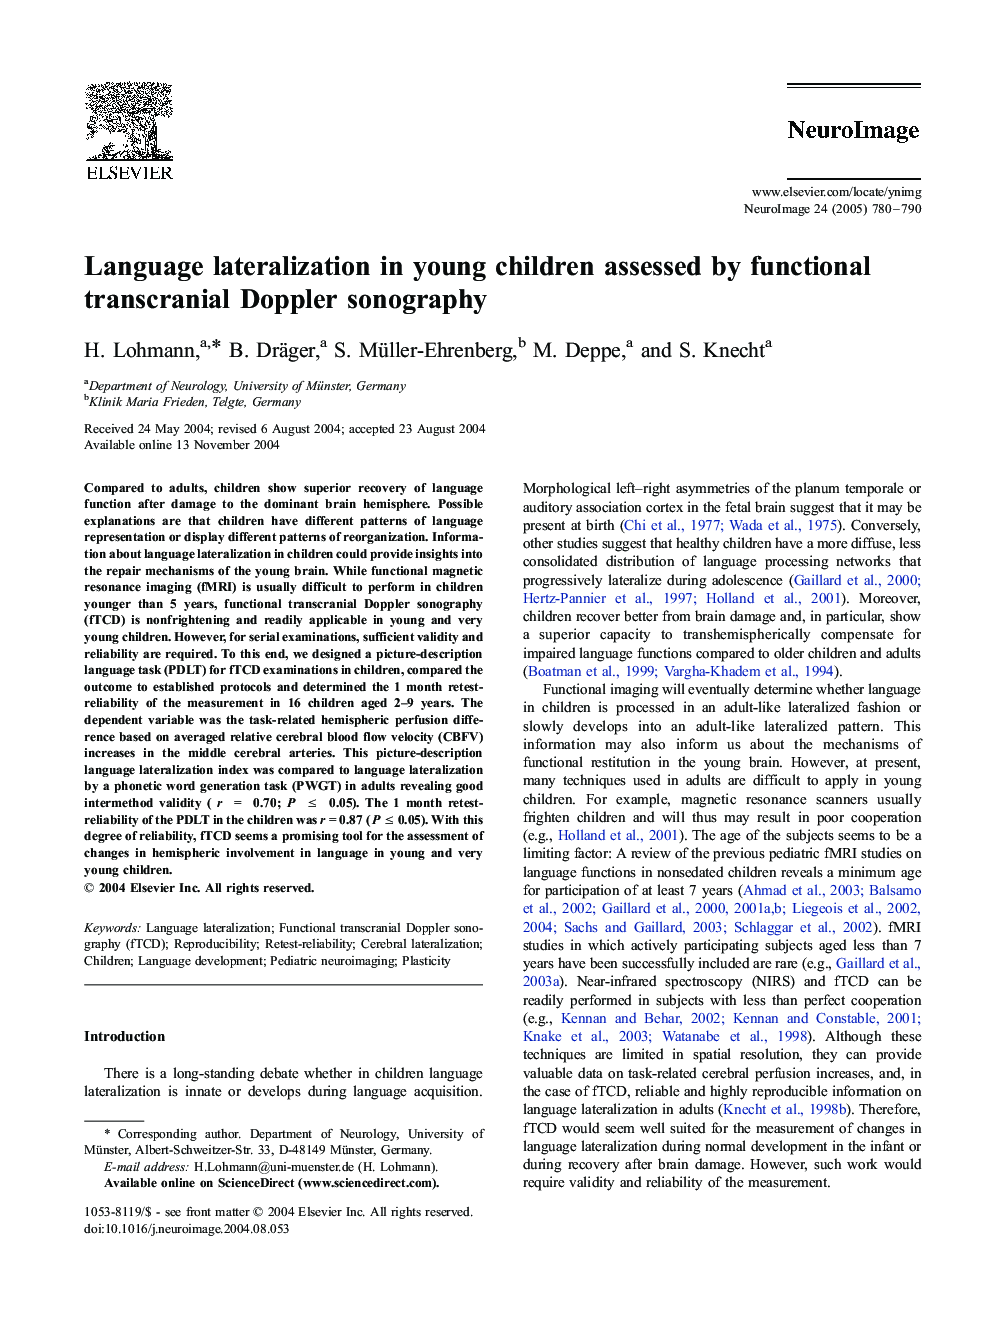 Language lateralization in young children assessed by functional transcranial Doppler sonography